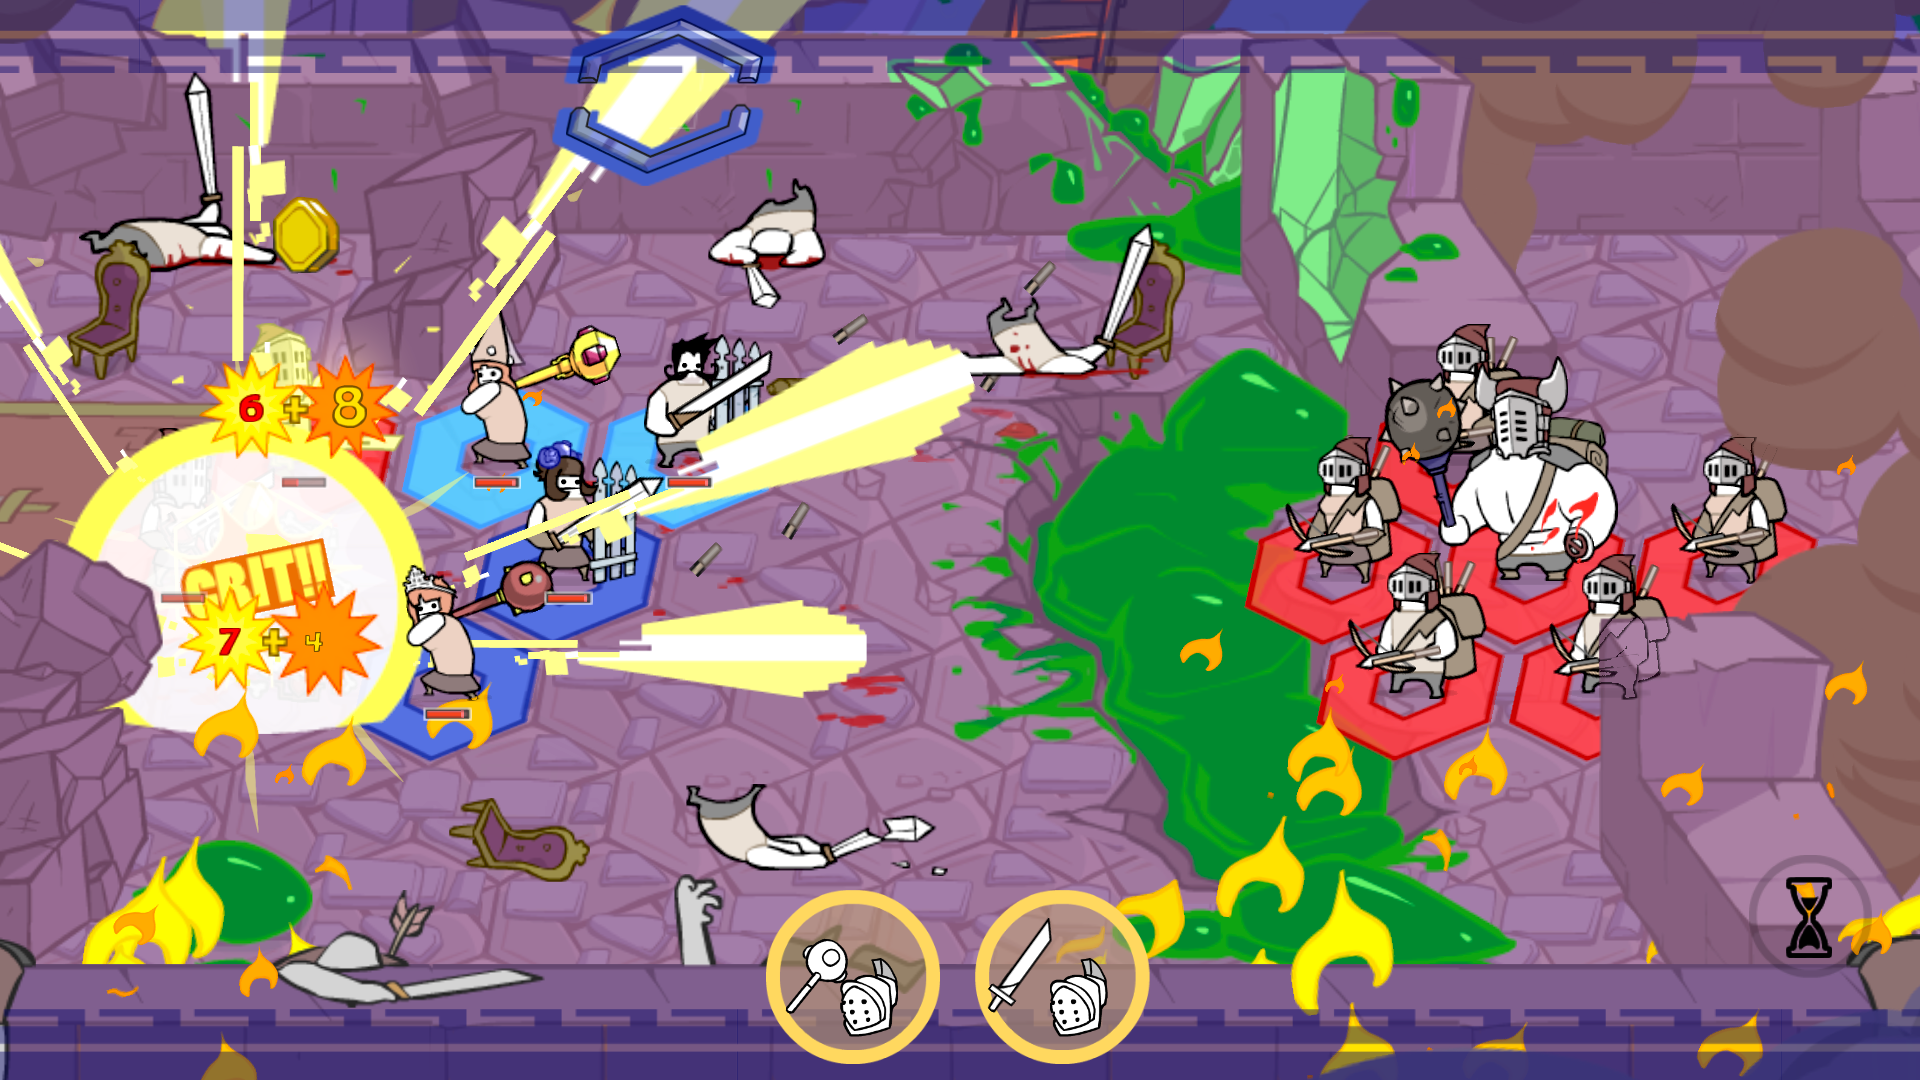 The Makers Of Castle Crashers Have A New Game And It’s Great